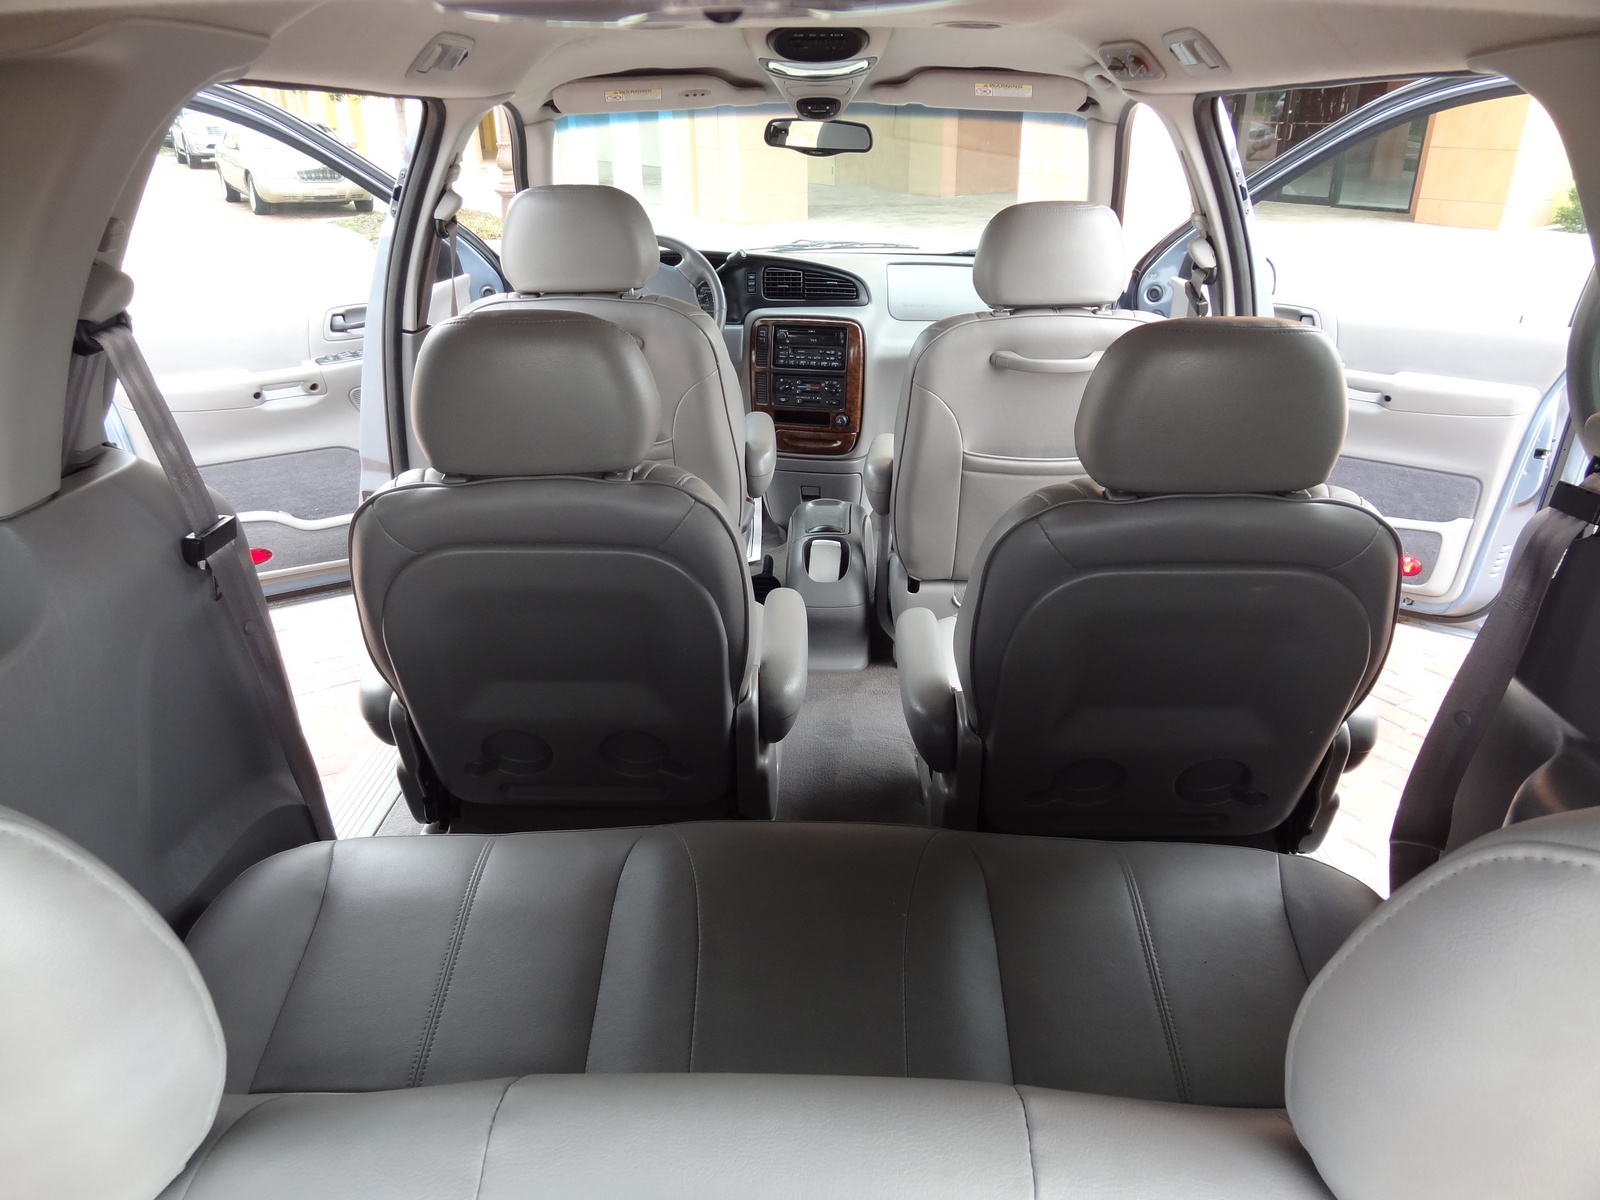 Ford windstar used seats